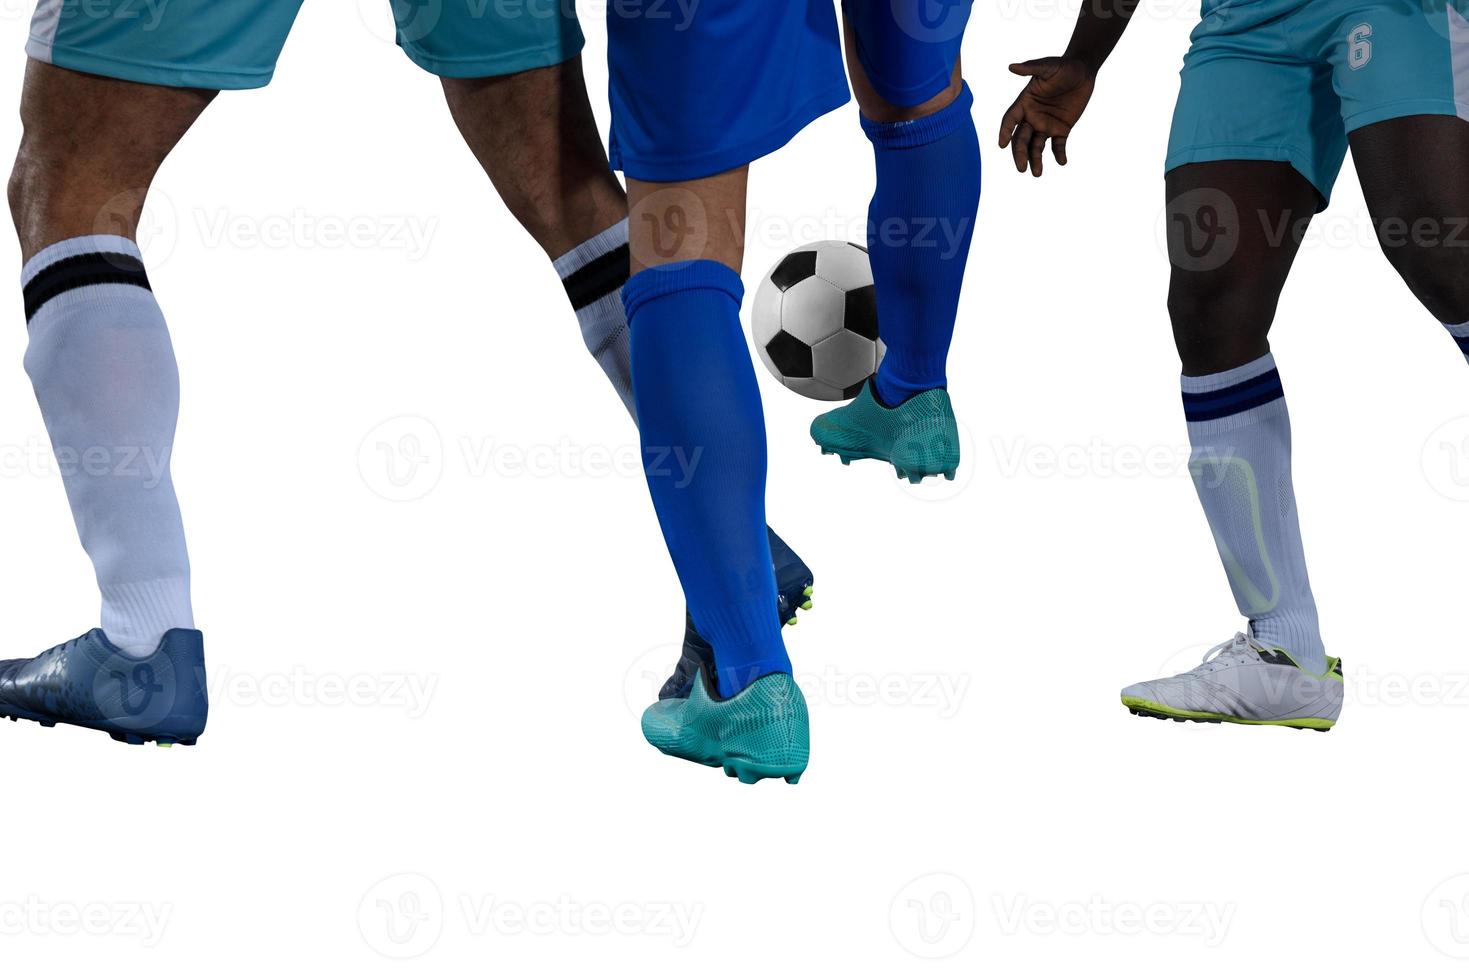 Isolated football player plays with soccerball in a match photo